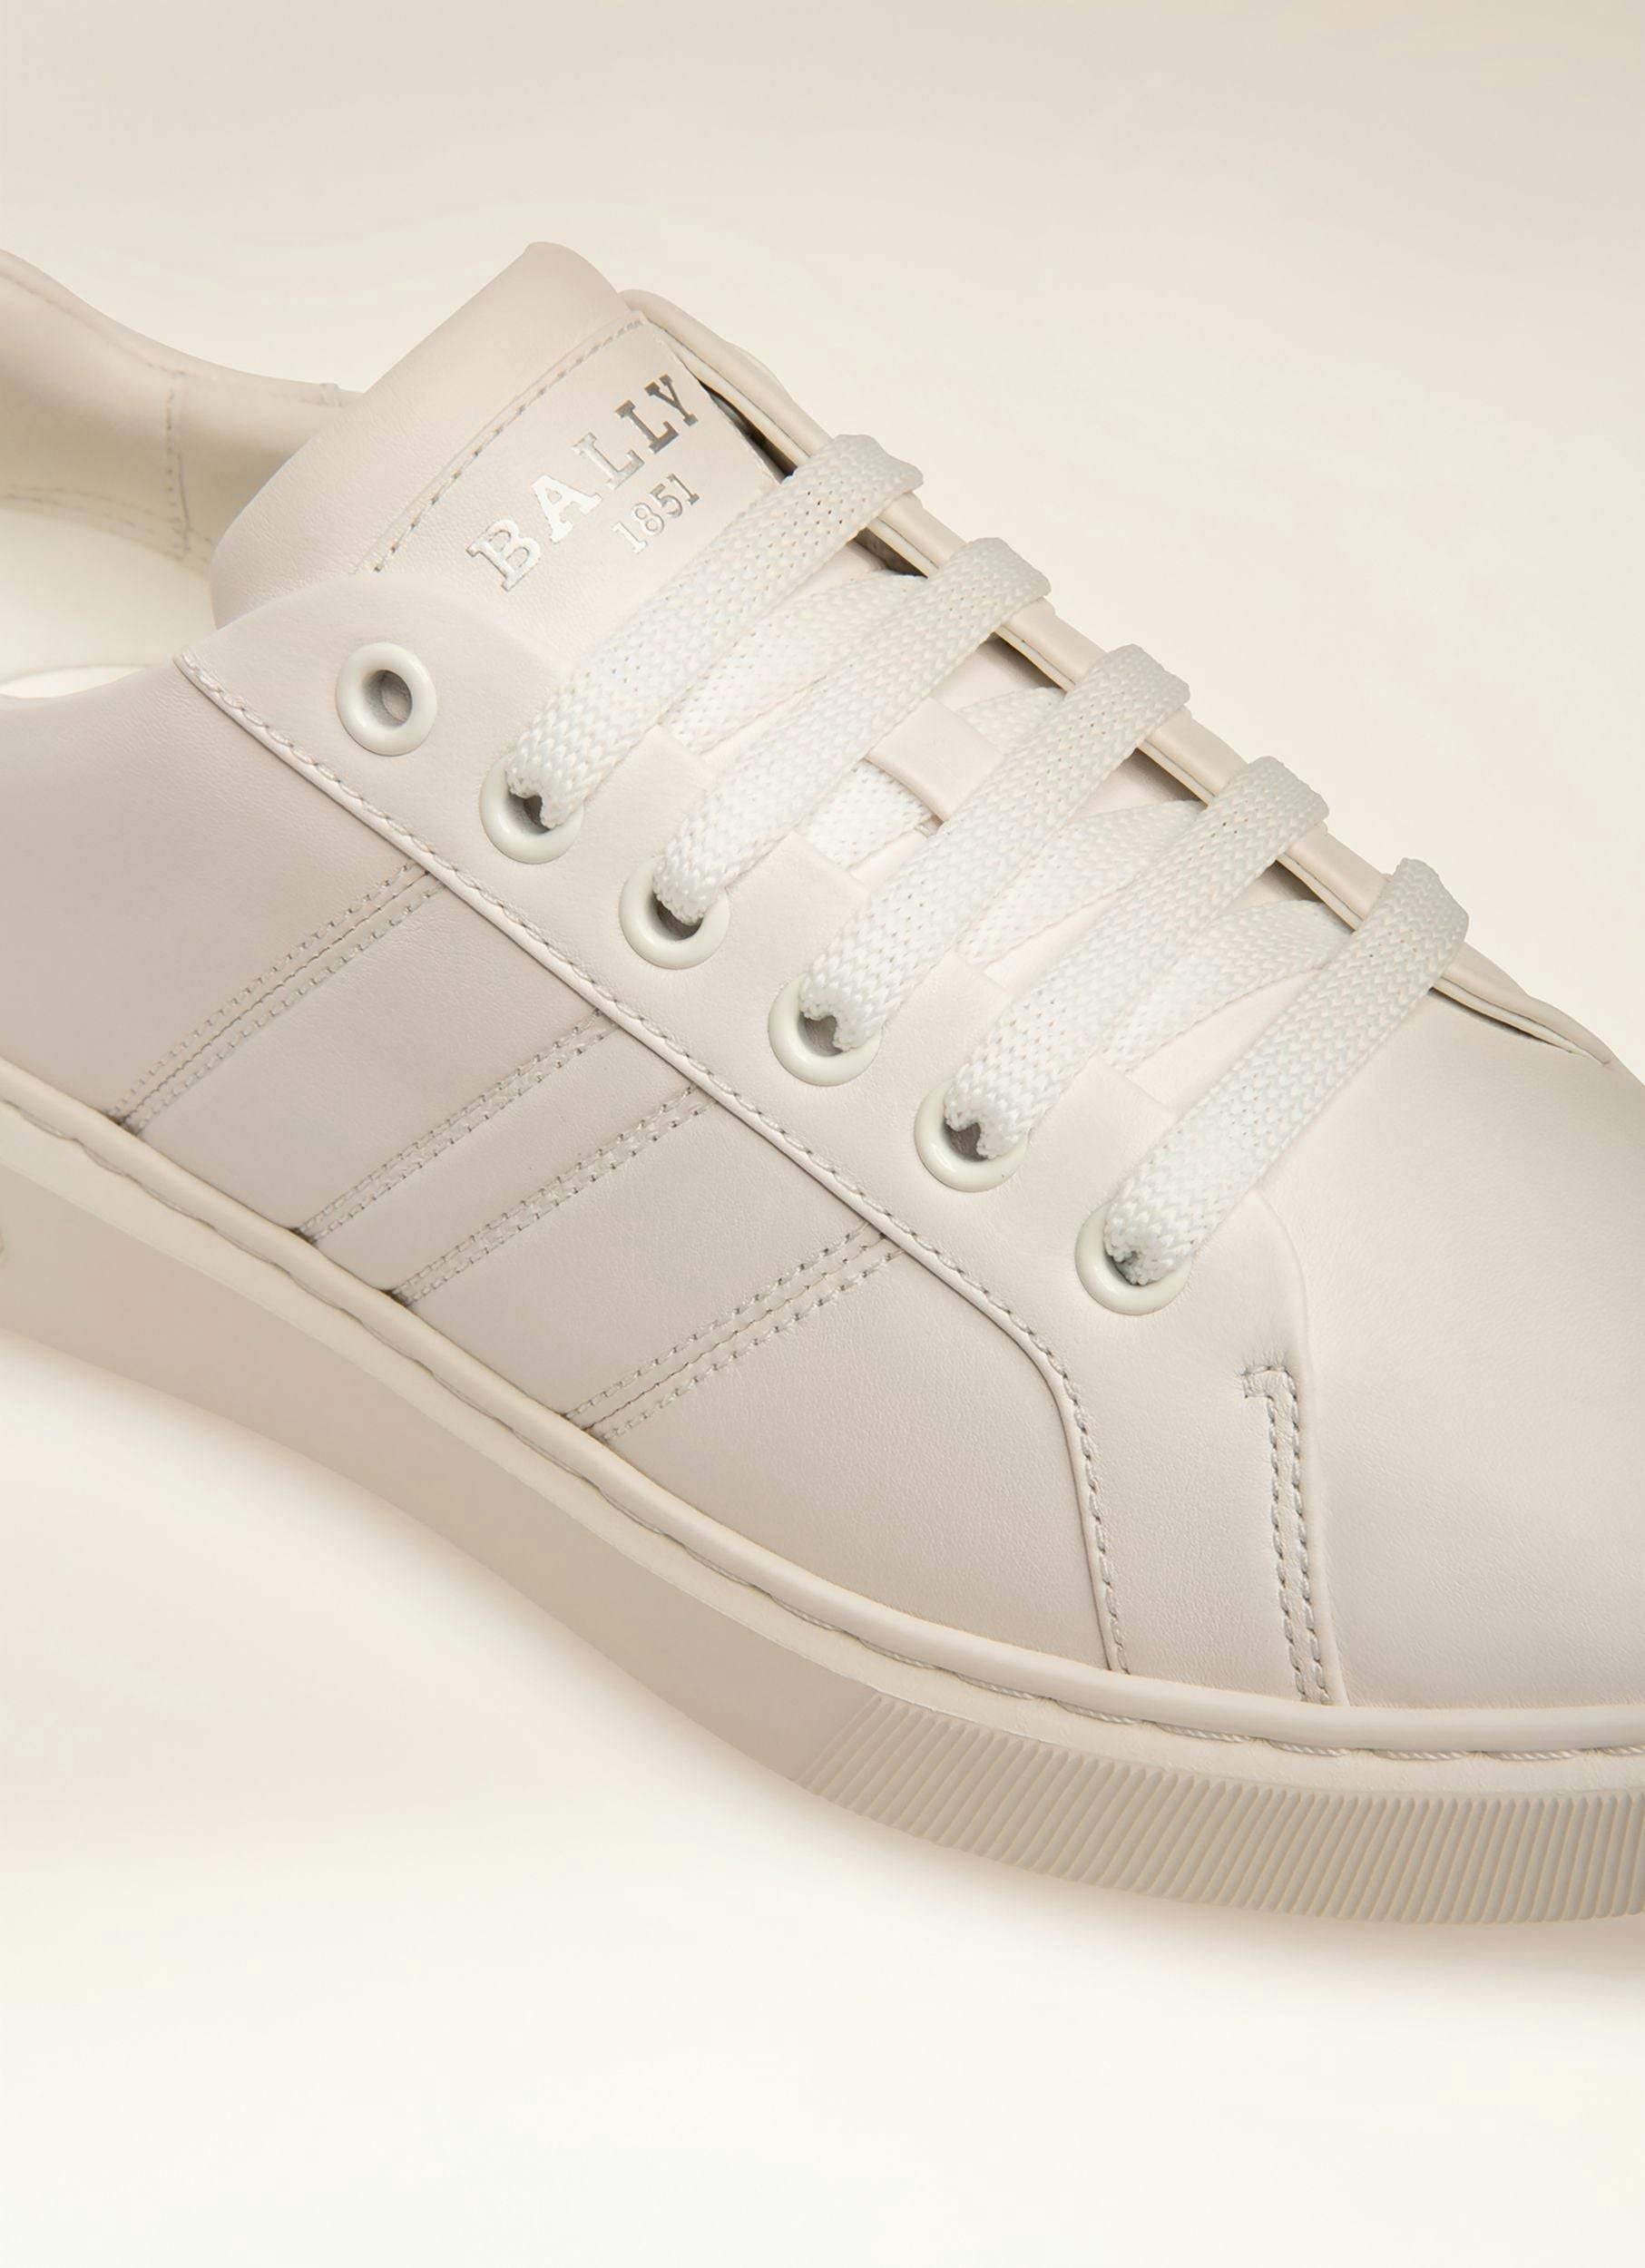 BALLY LIFT Leather Sneakers In White - Women's - Bally - 02